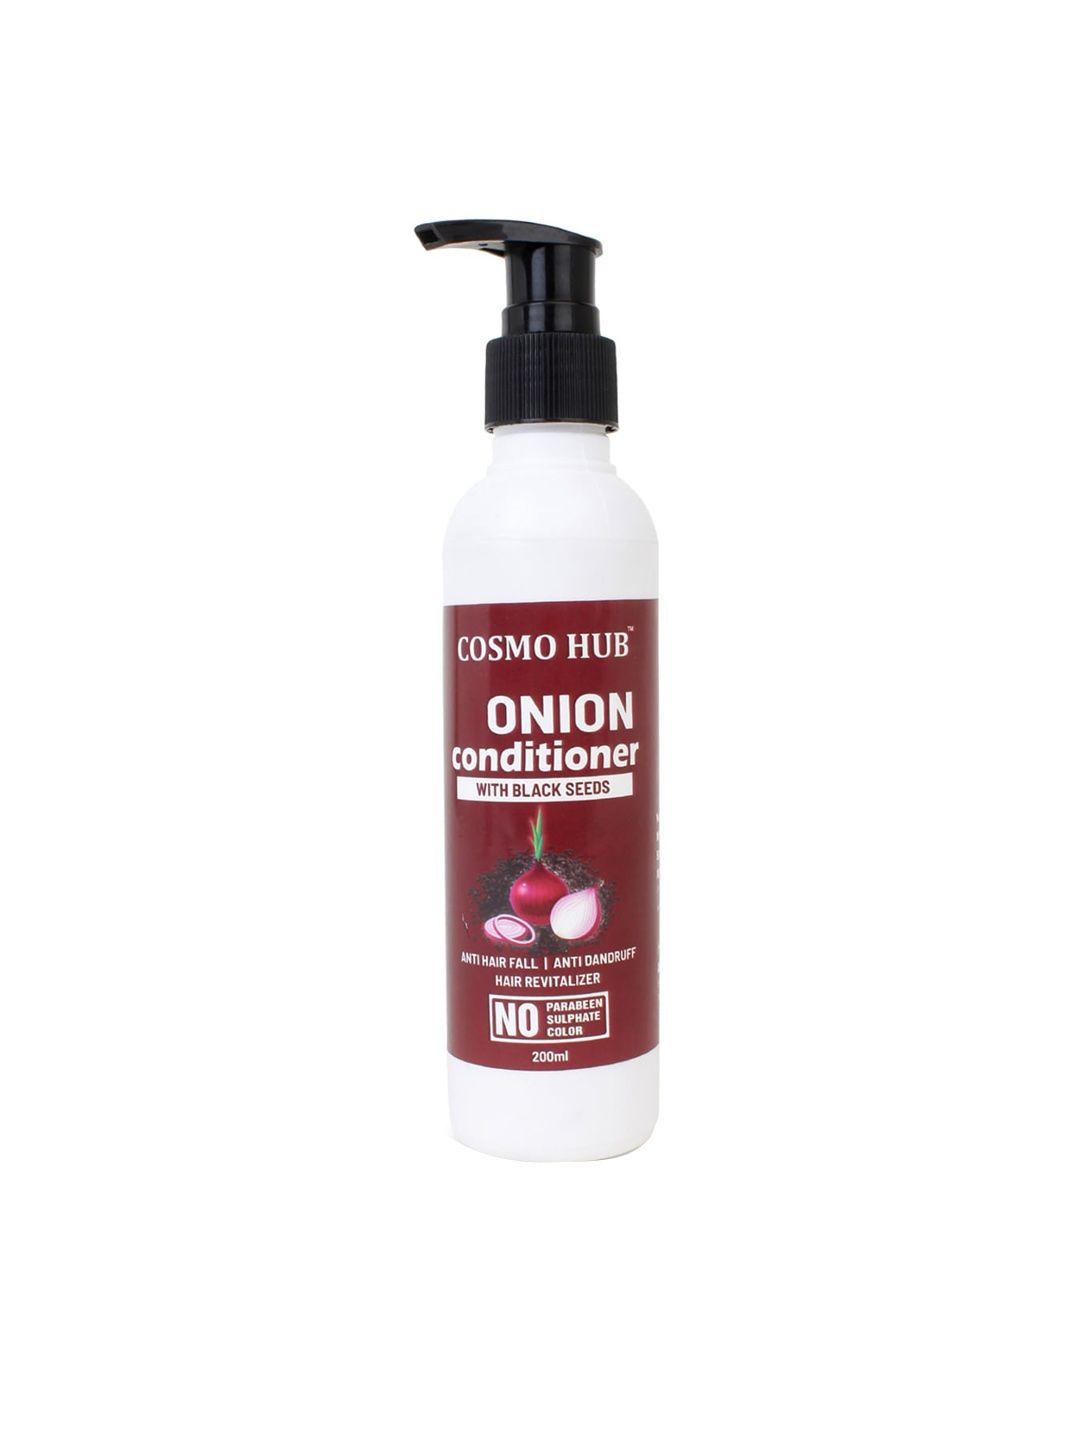 cosmo hub onion with black seeds conditioner 200ml